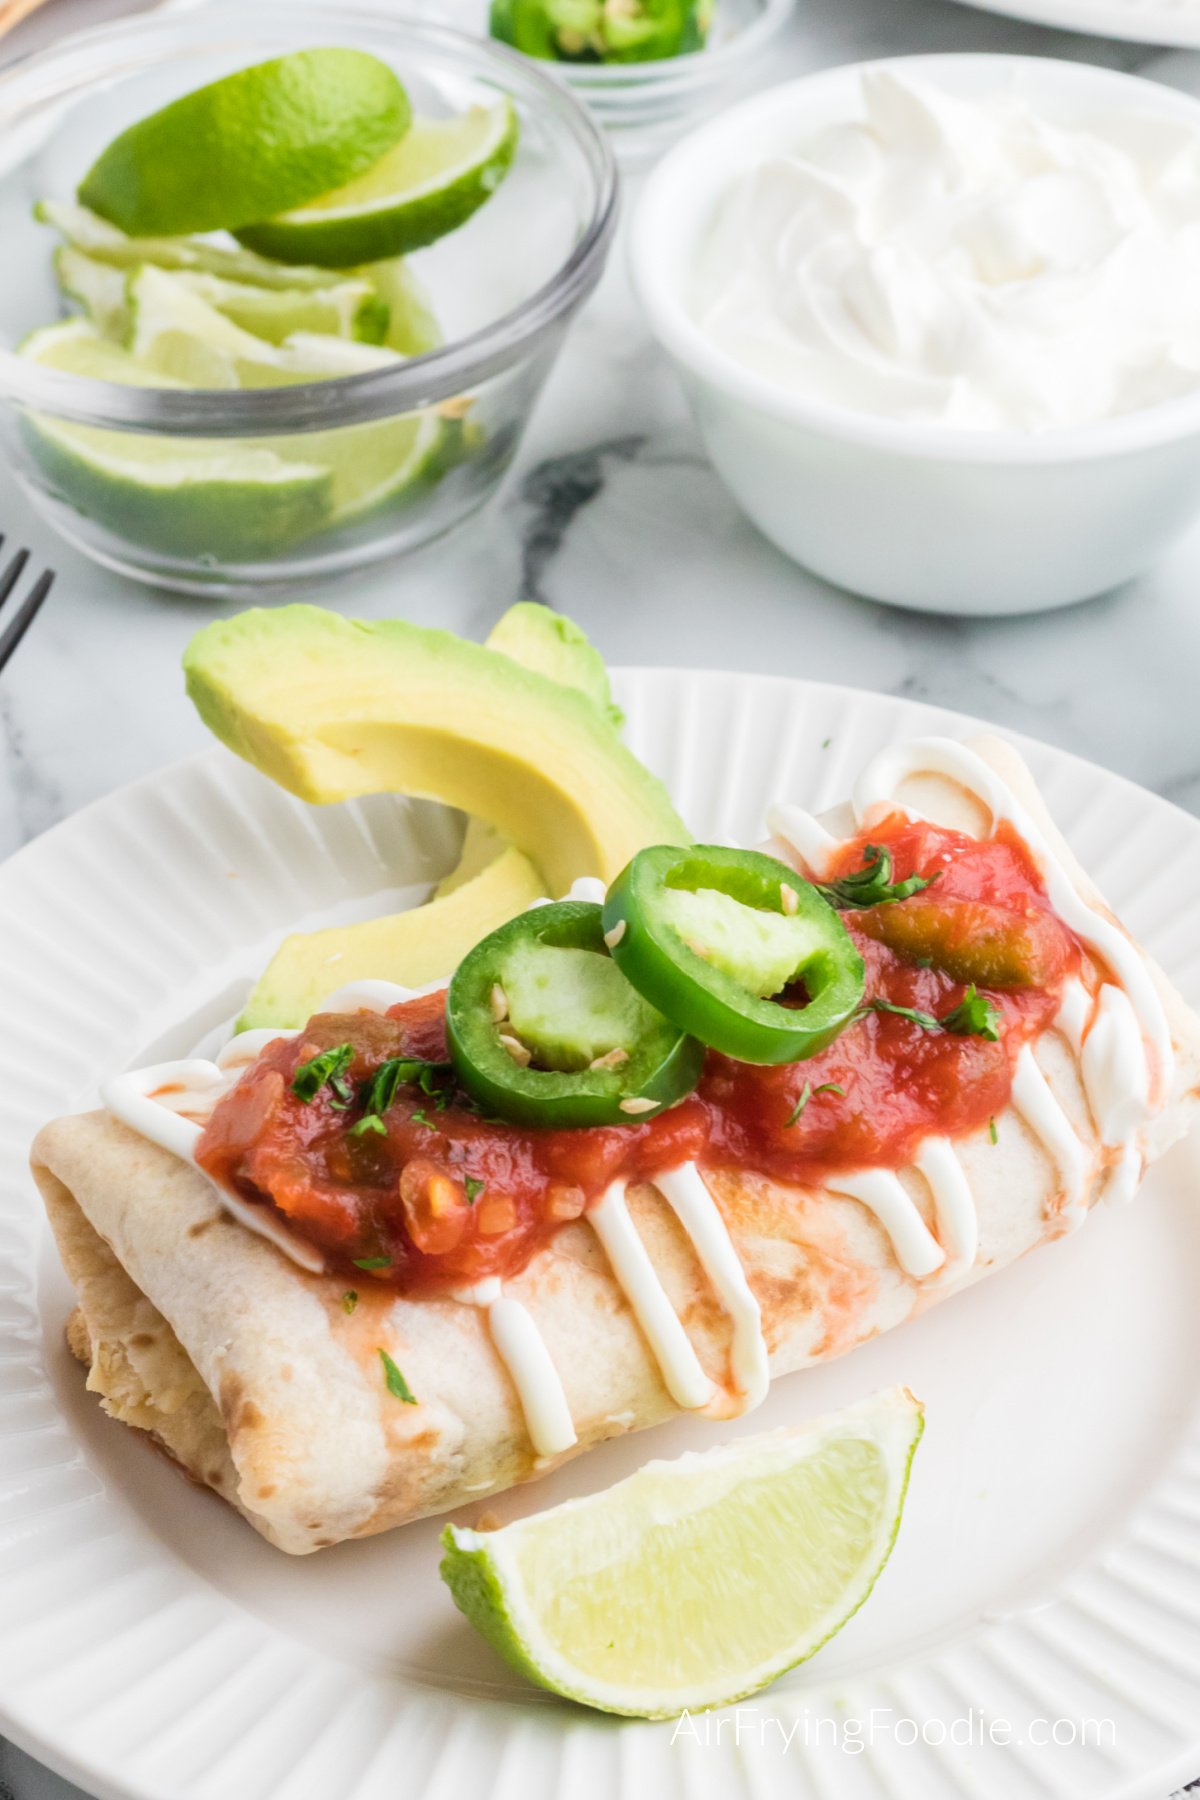 Chimichanga topped with sour cream, salsa, and sliced jalapenos on a white plate.